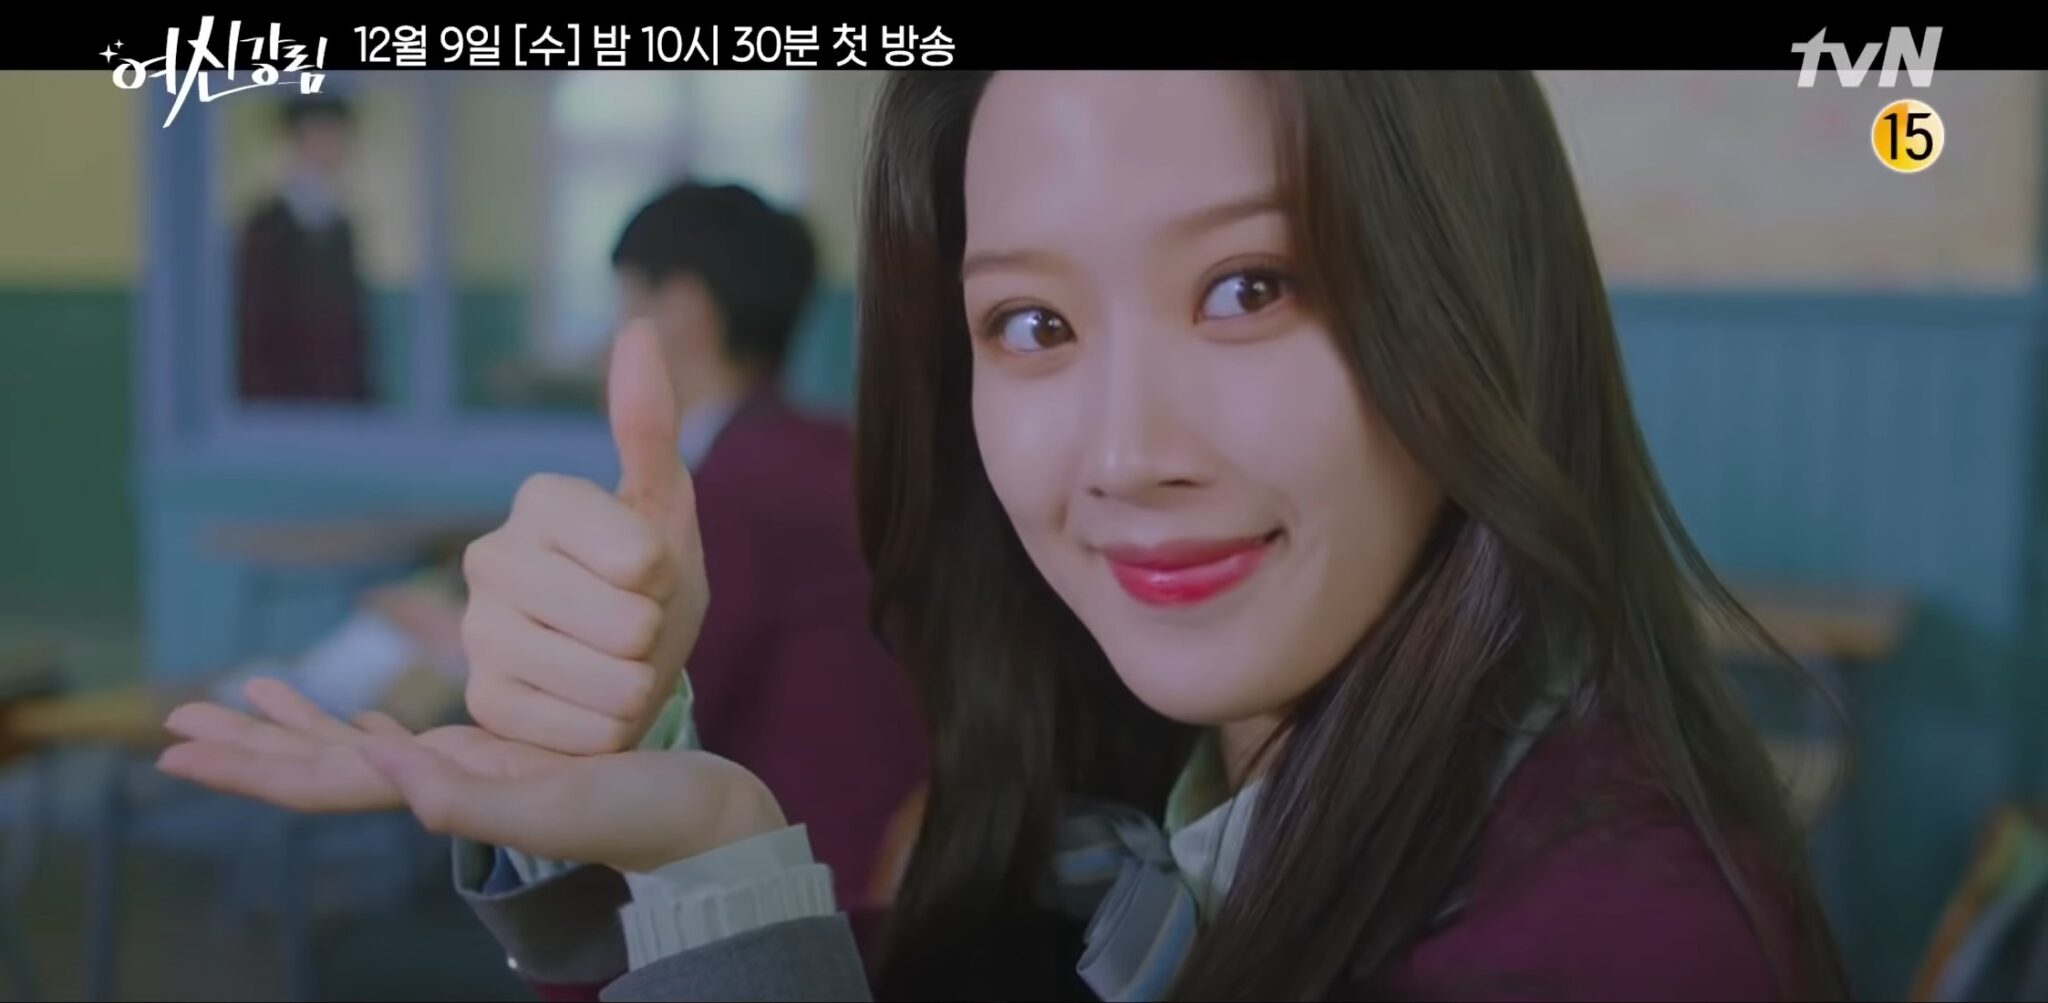 High school romance and mishaps in new True Beauty teaser